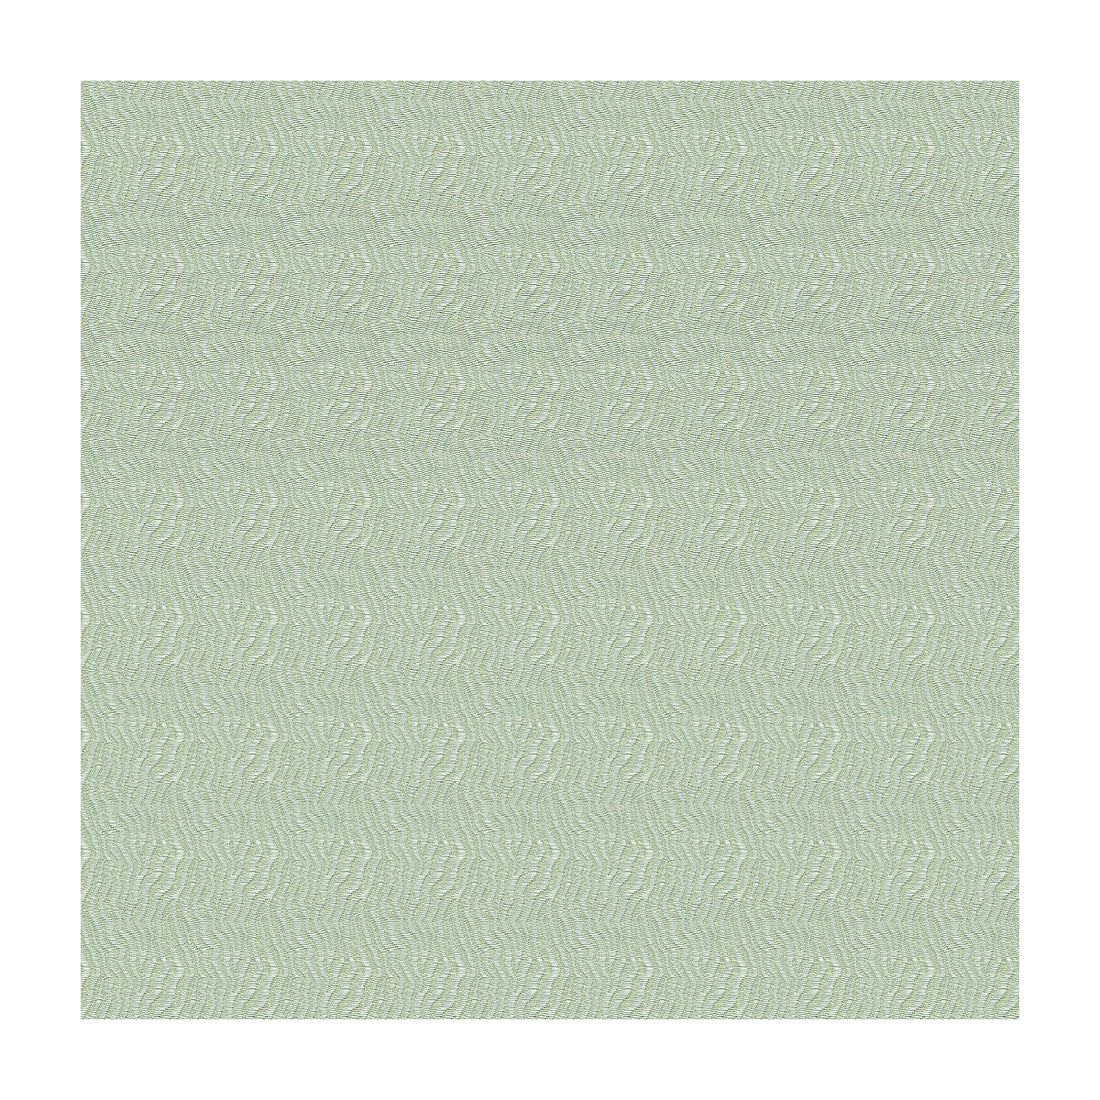 Jentry fabric in mist color - pattern 32009.1115.0 - by Kravet Basics in the Candice Olson collection